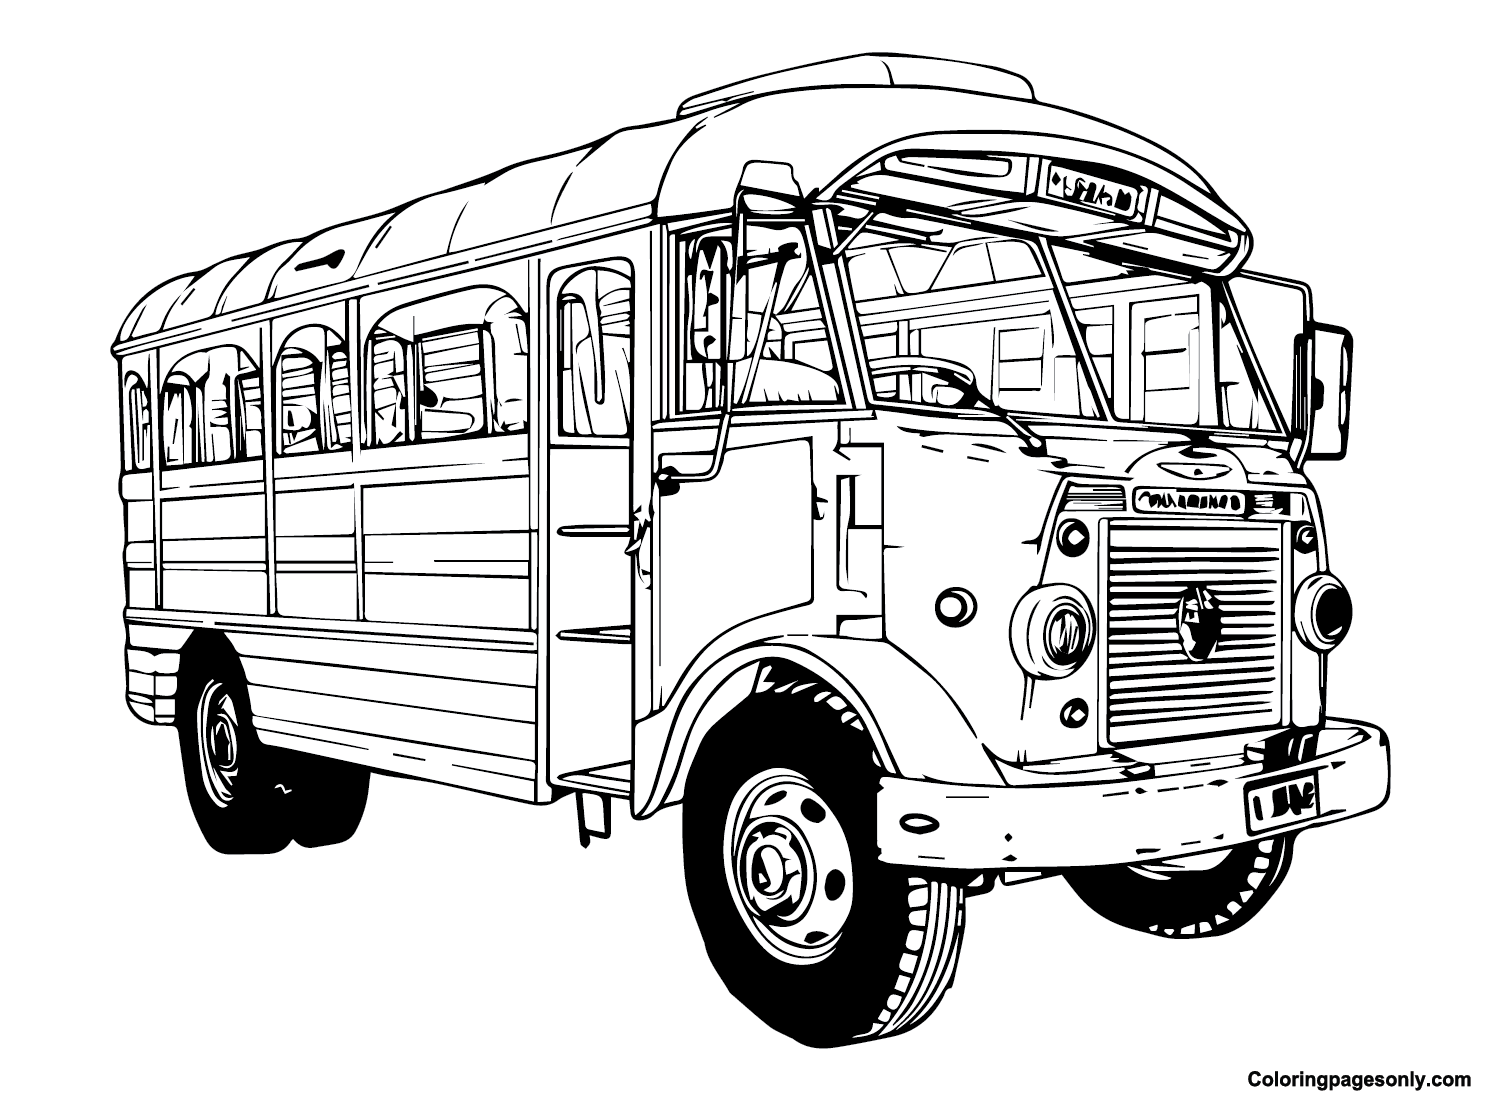 Jeepney Images Free Coloring Page